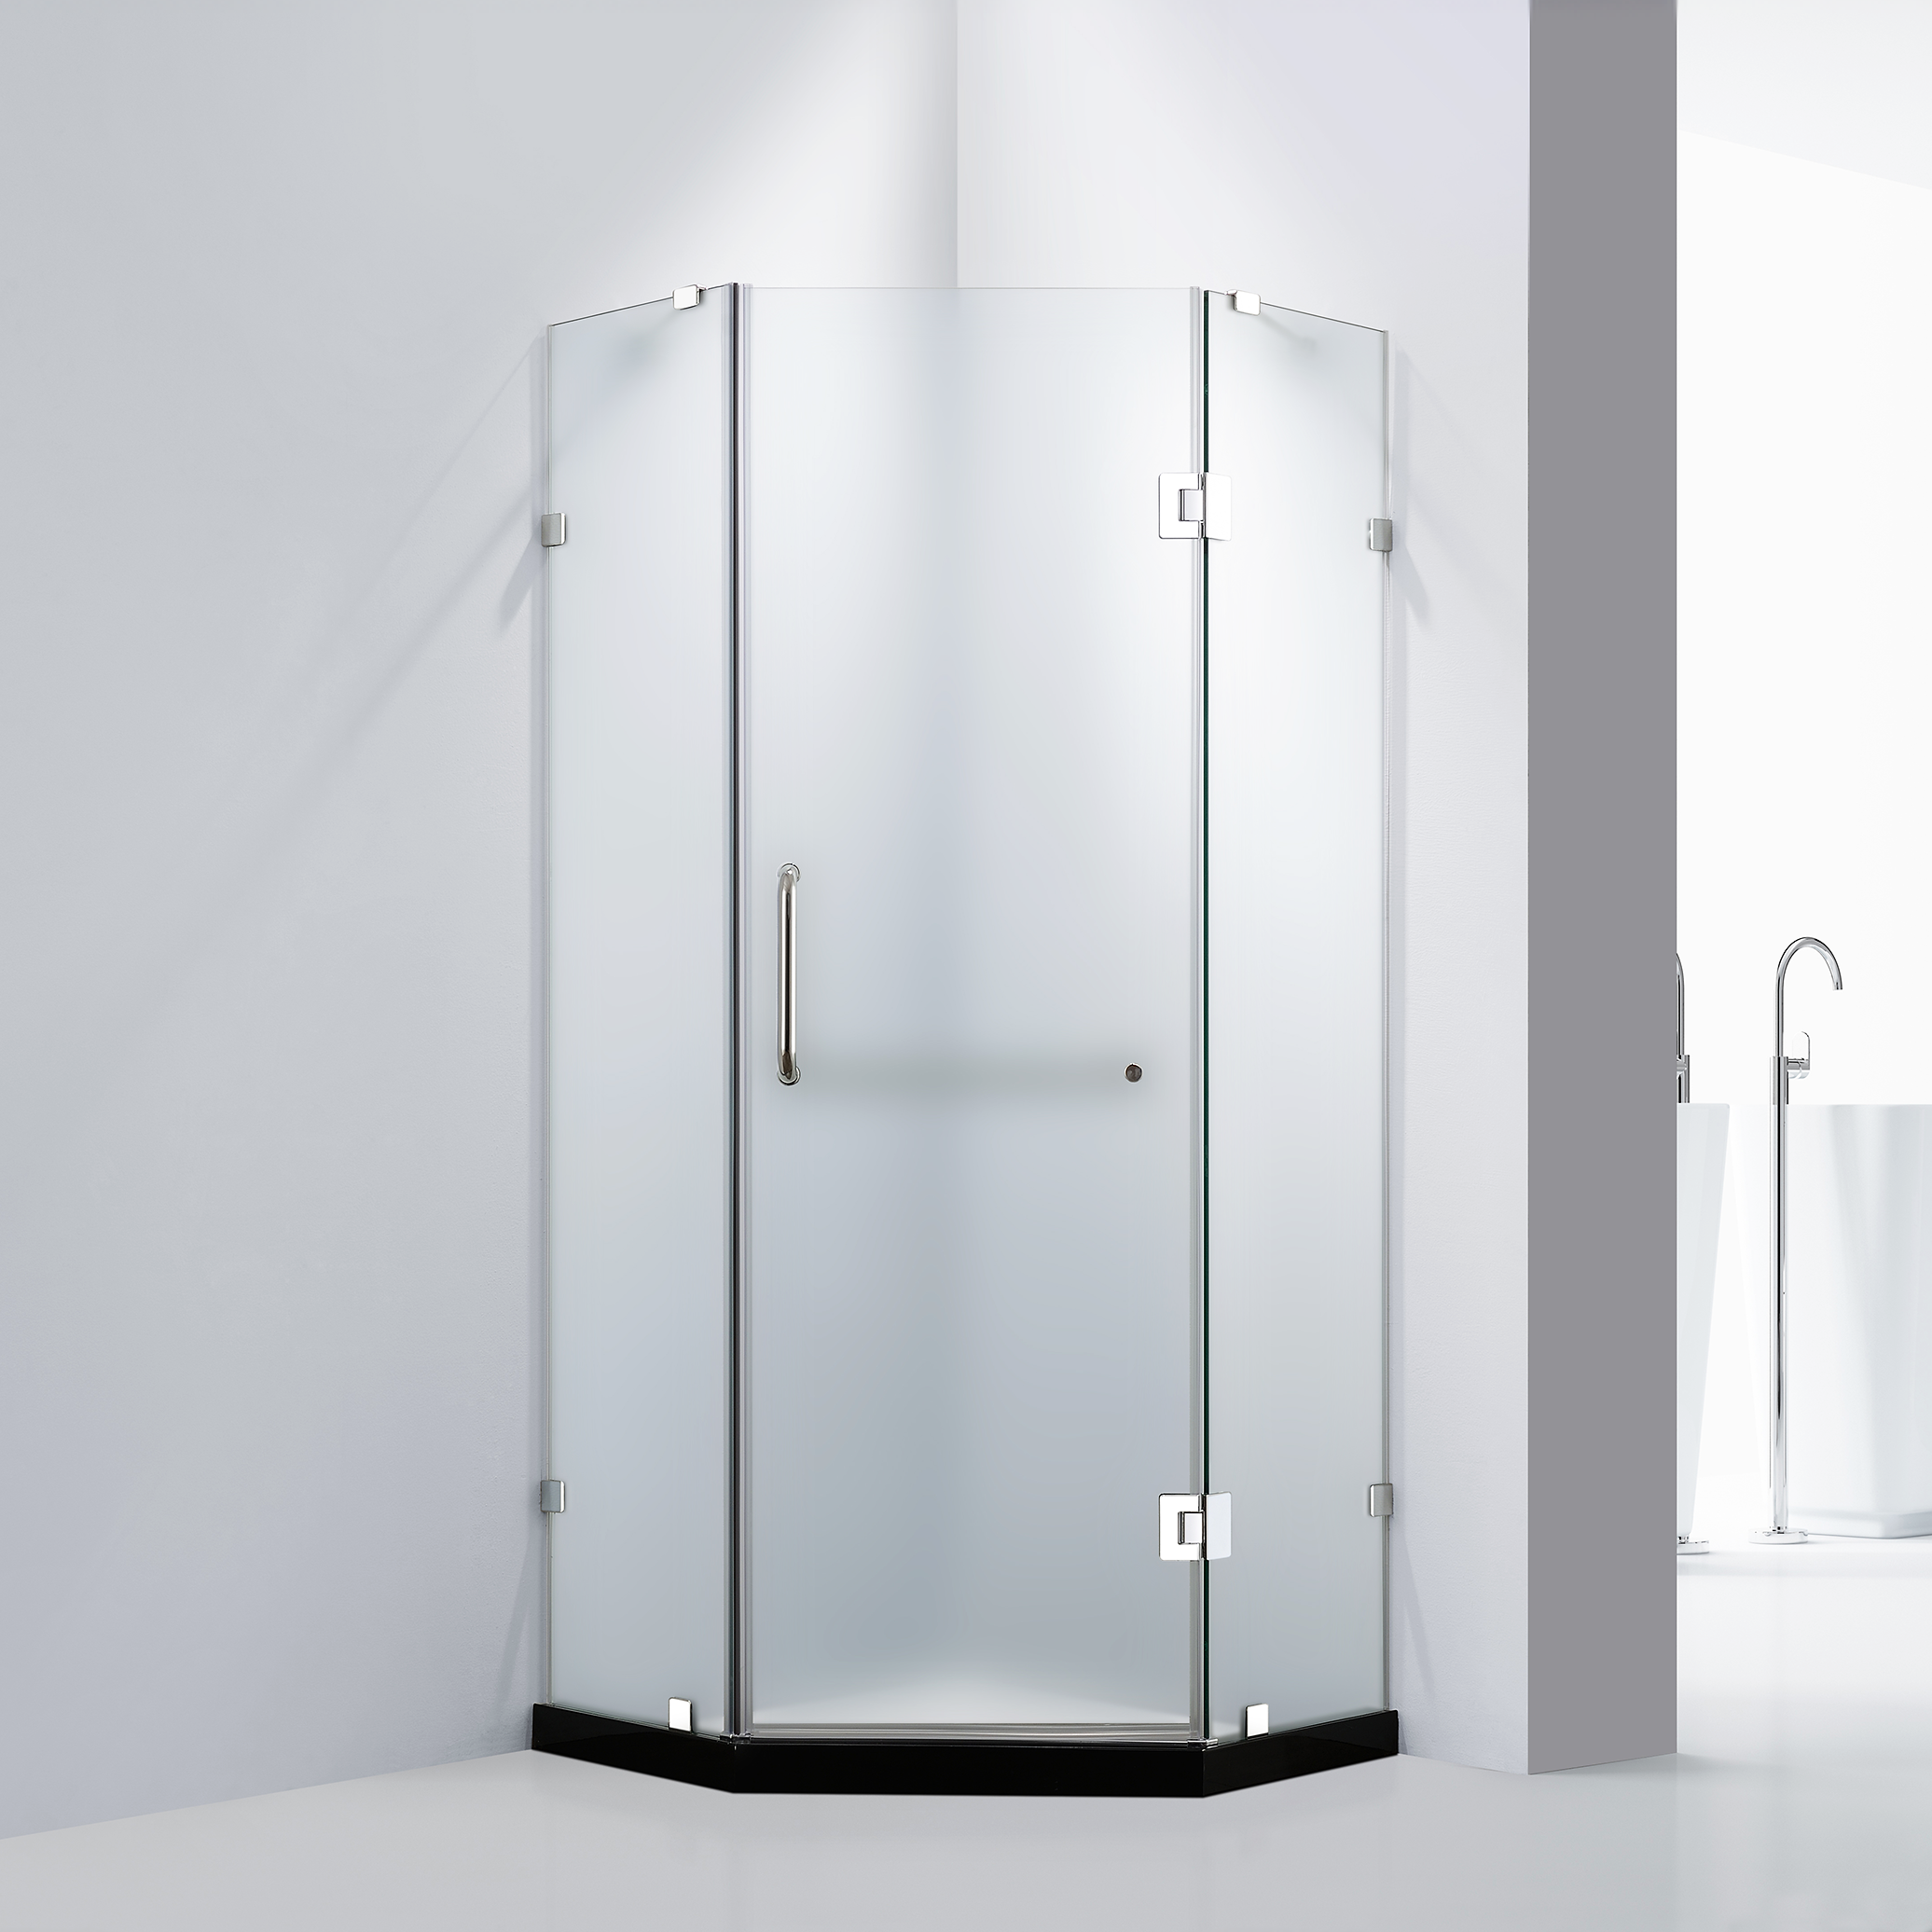 Dreamwerks 36 in. W x 79 in. H Frameless Neo-Angle Hinged Shower Door (Right) in Chrome with Handle - Frosted Glass - Dreamwerks